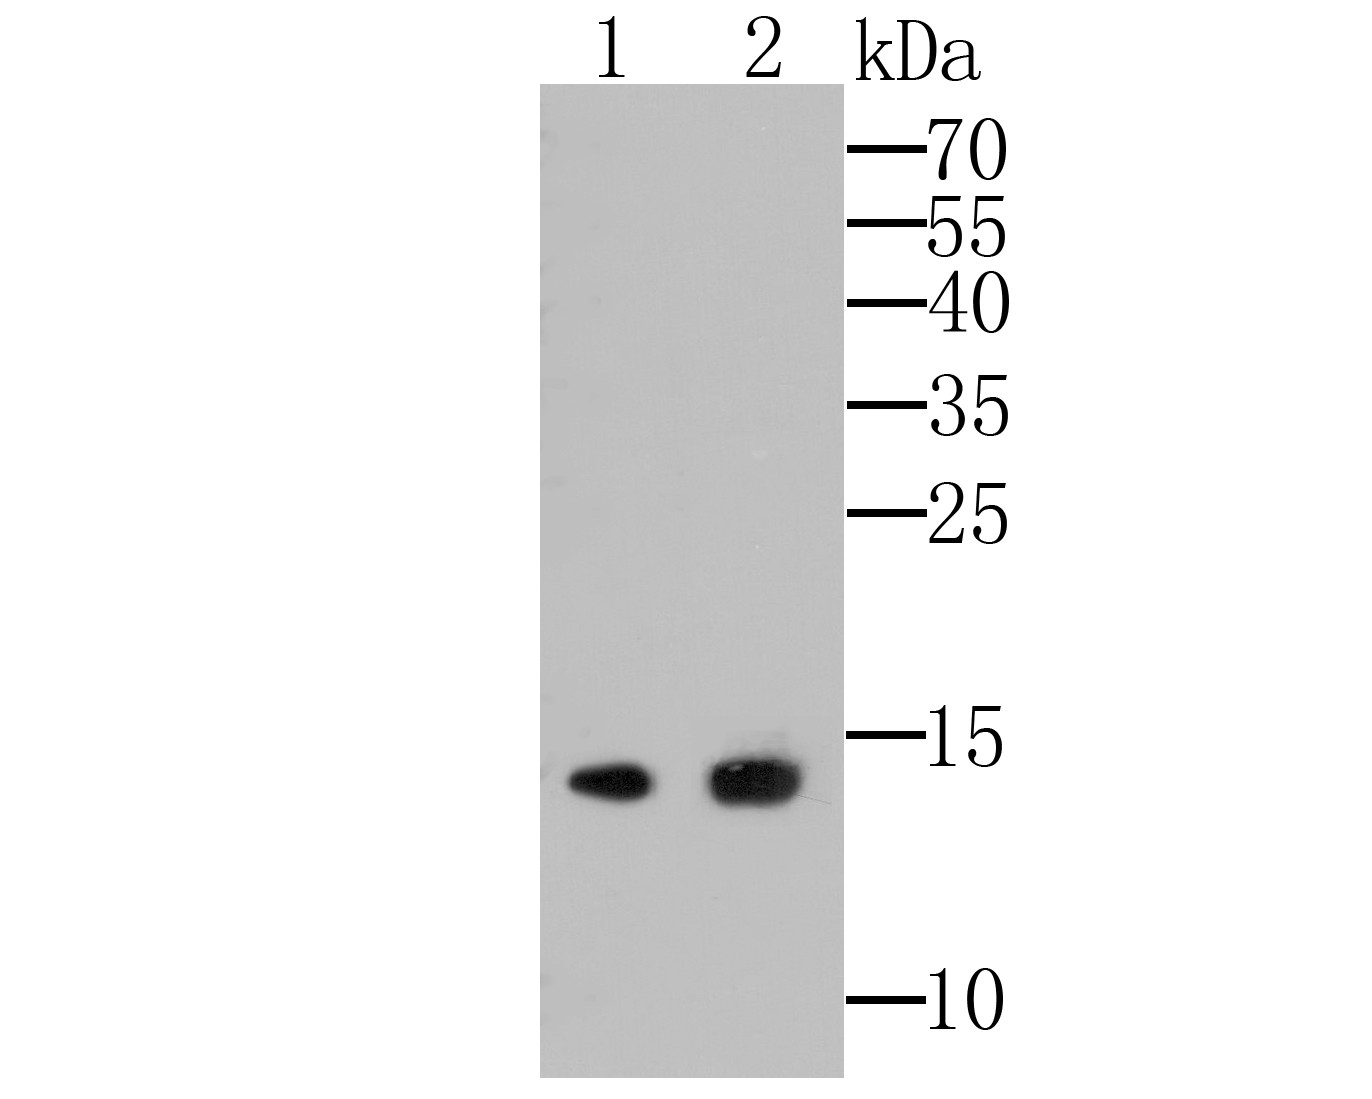 Western blot analysis of APRIL/TNFSF13 on Hela cell and A549 cell lysates. Proteins were transferred to a PVDF membrane and blocked with 5% BSA in PBS for 1 hour at room temperature. The primary antibody (ET7109-89, 1/500) was used in 5% BSA at room temperature for 2 hours. Goat Anti-Rabbit IgG - HRP Secondary Antibody (HA1001) at 1:5,000 dilution was used for 1 hour at room temperature.